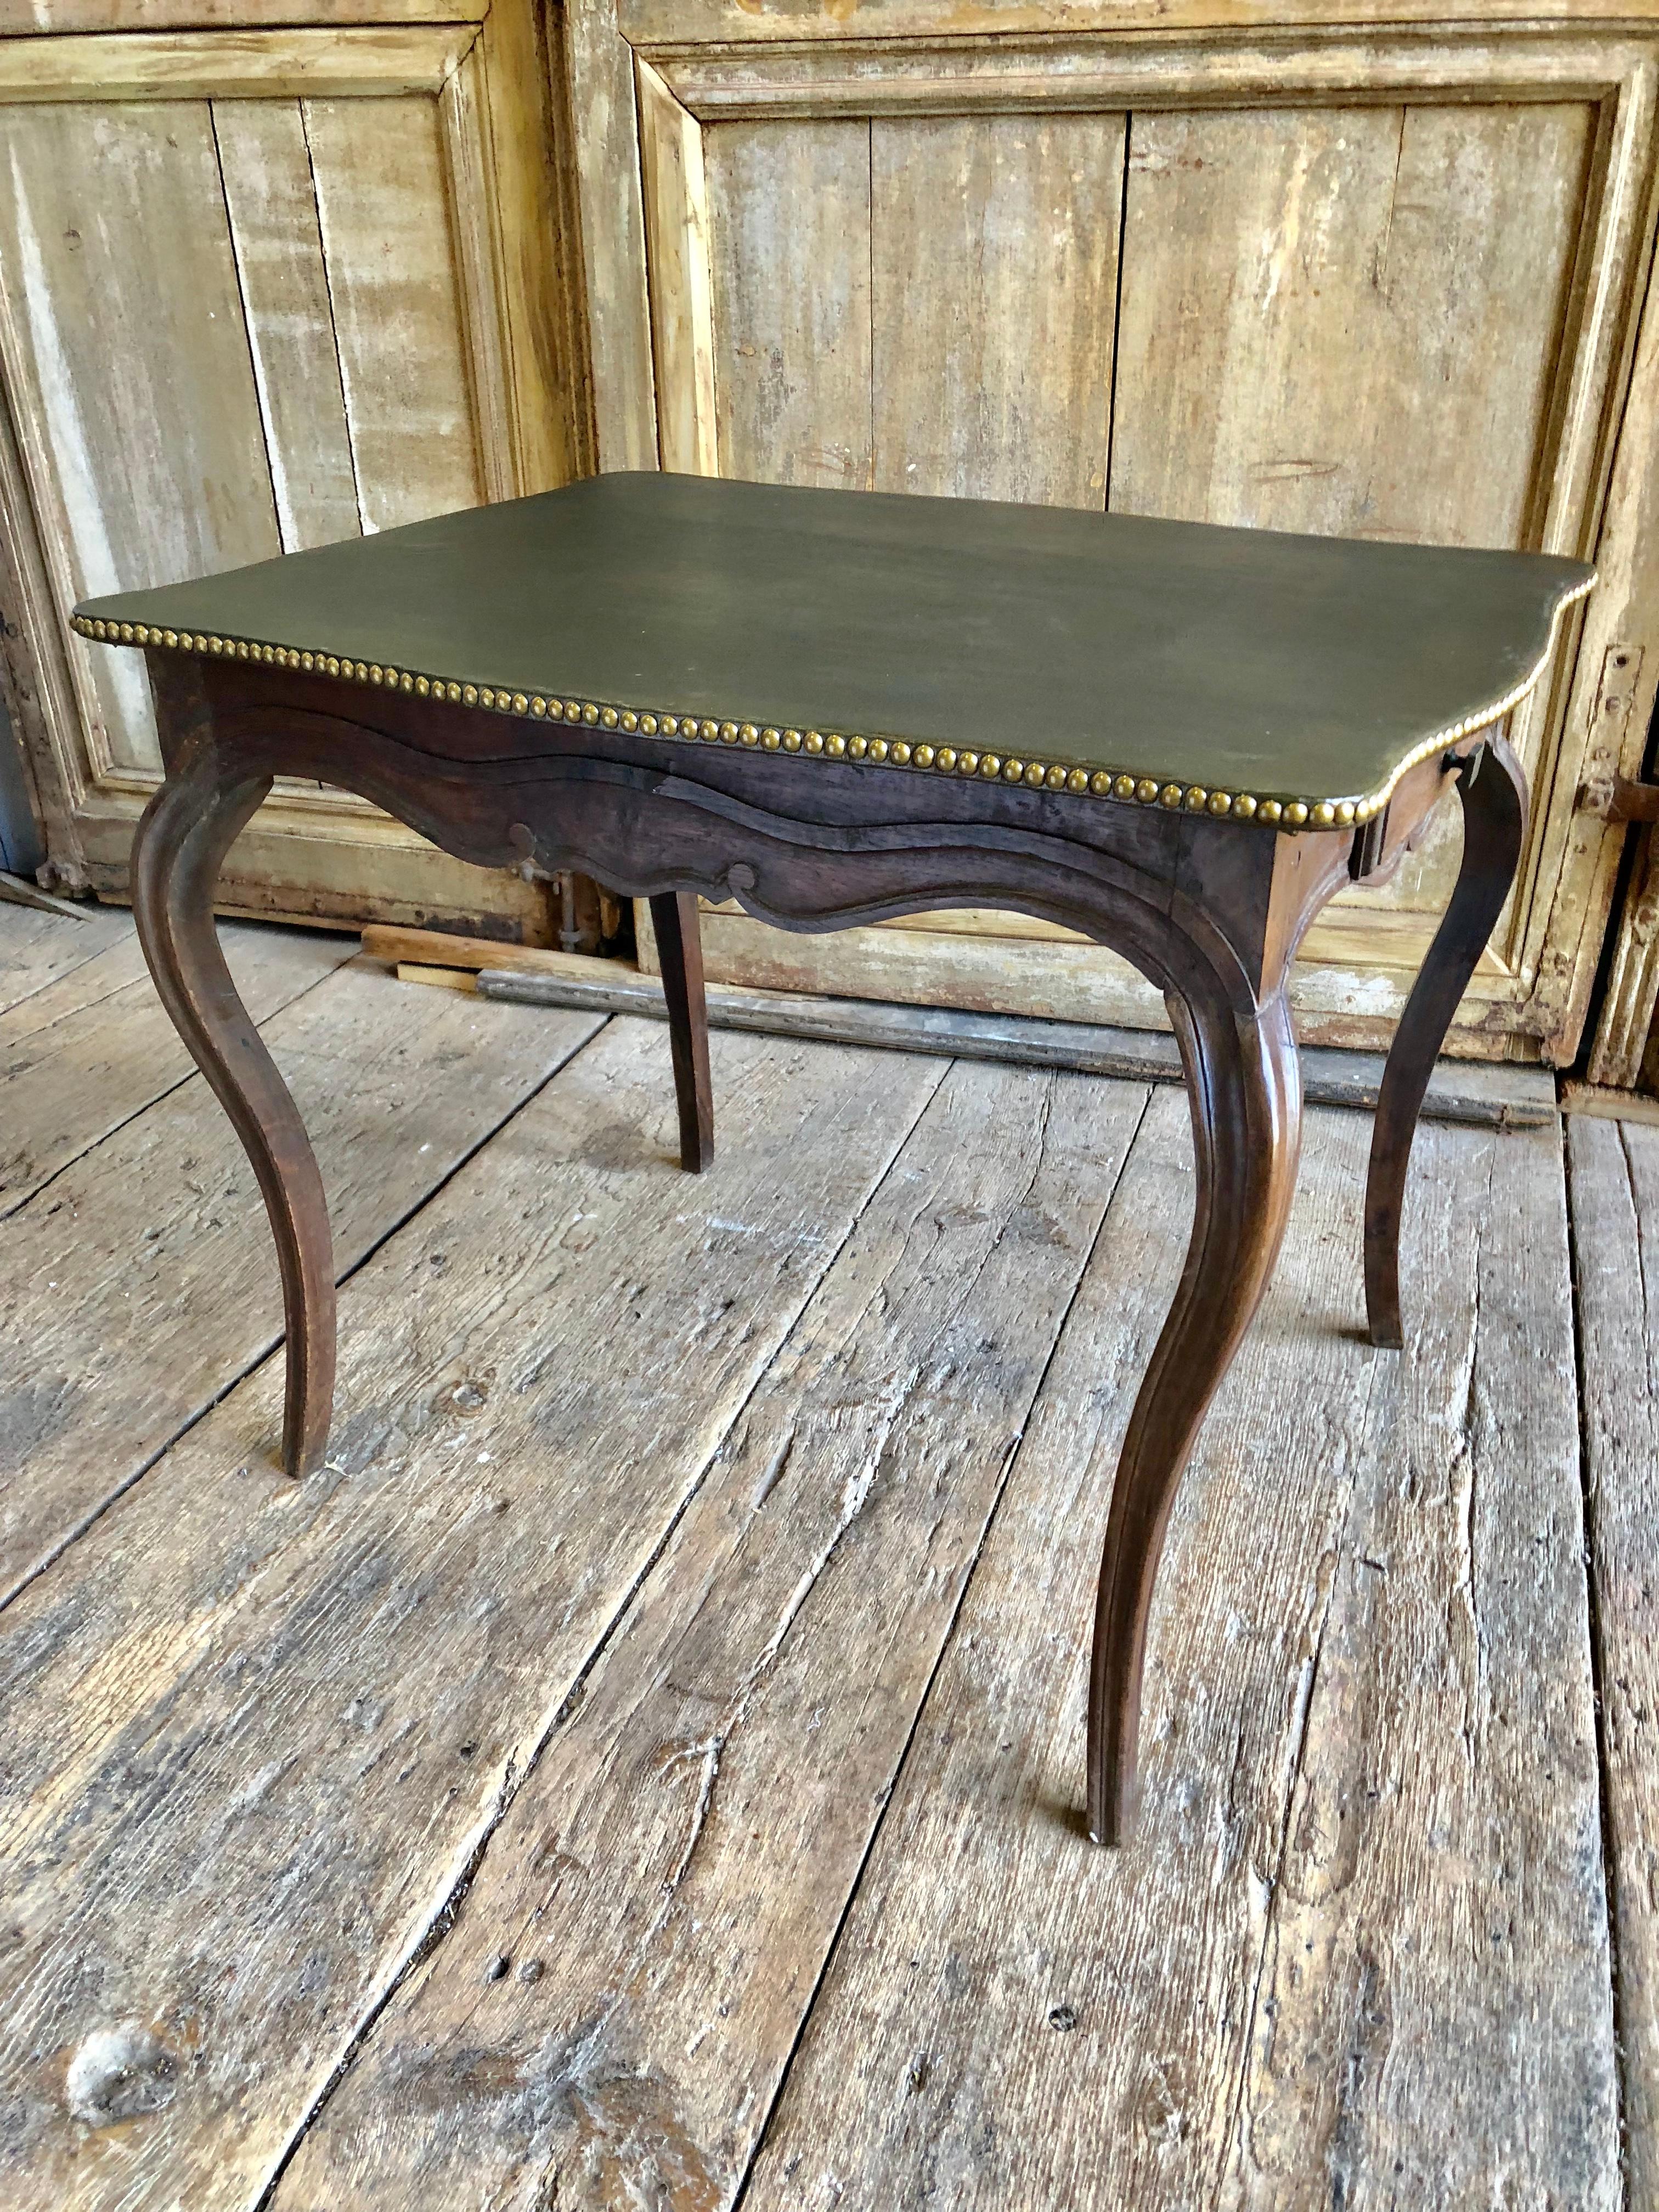 An 18th century leather-top side or card table circa 1780 in oak, with a dark green leather top with brass nail details, two small drawers in the scalloped apron on slender cabriole legs.